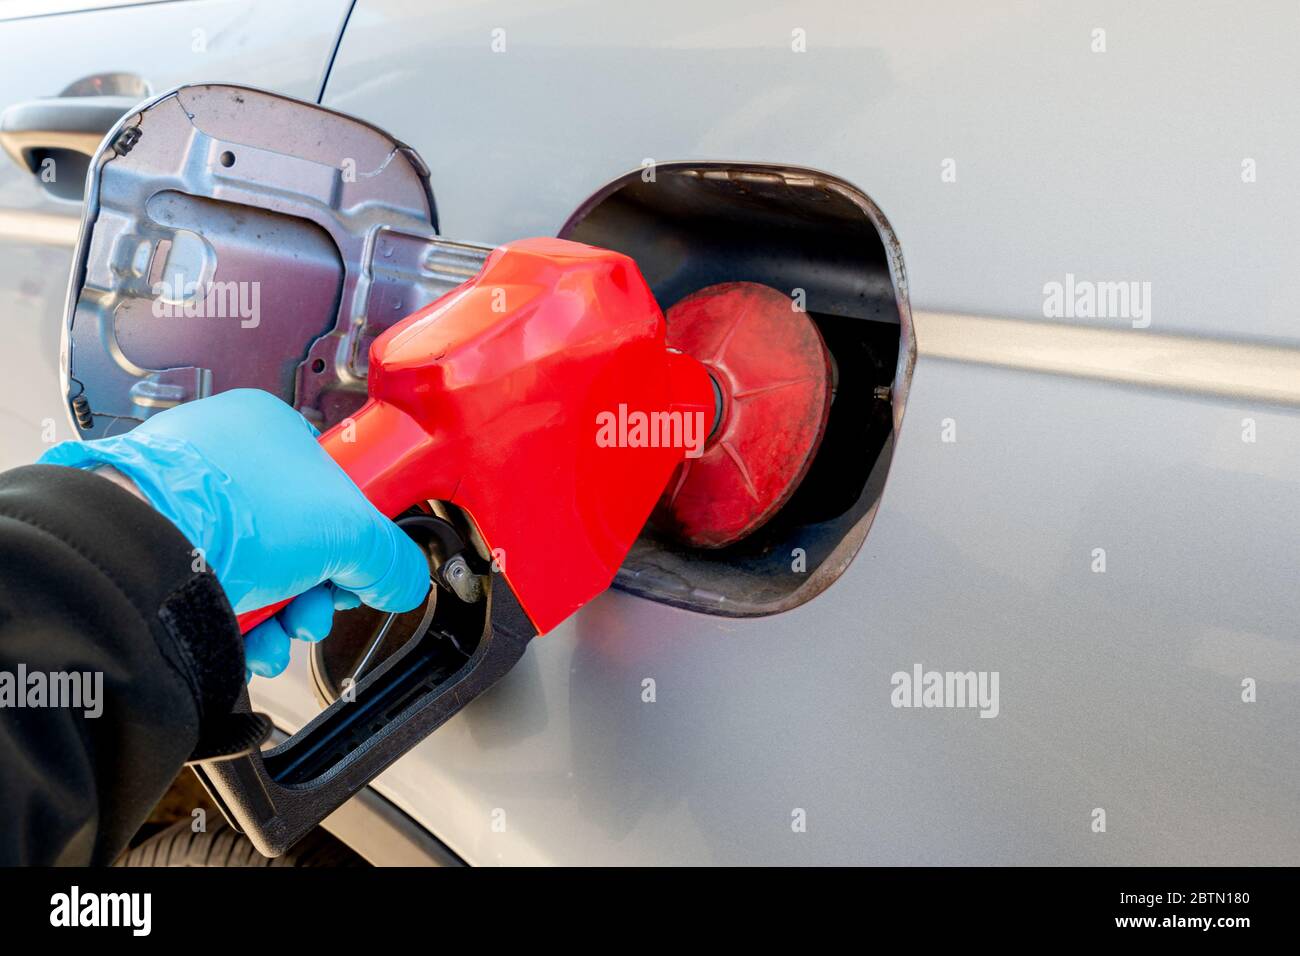 Hand wearing a blue personal protective glove pumps gas into an automobile. Shallow depth of field, focus on pump. Stock Photo